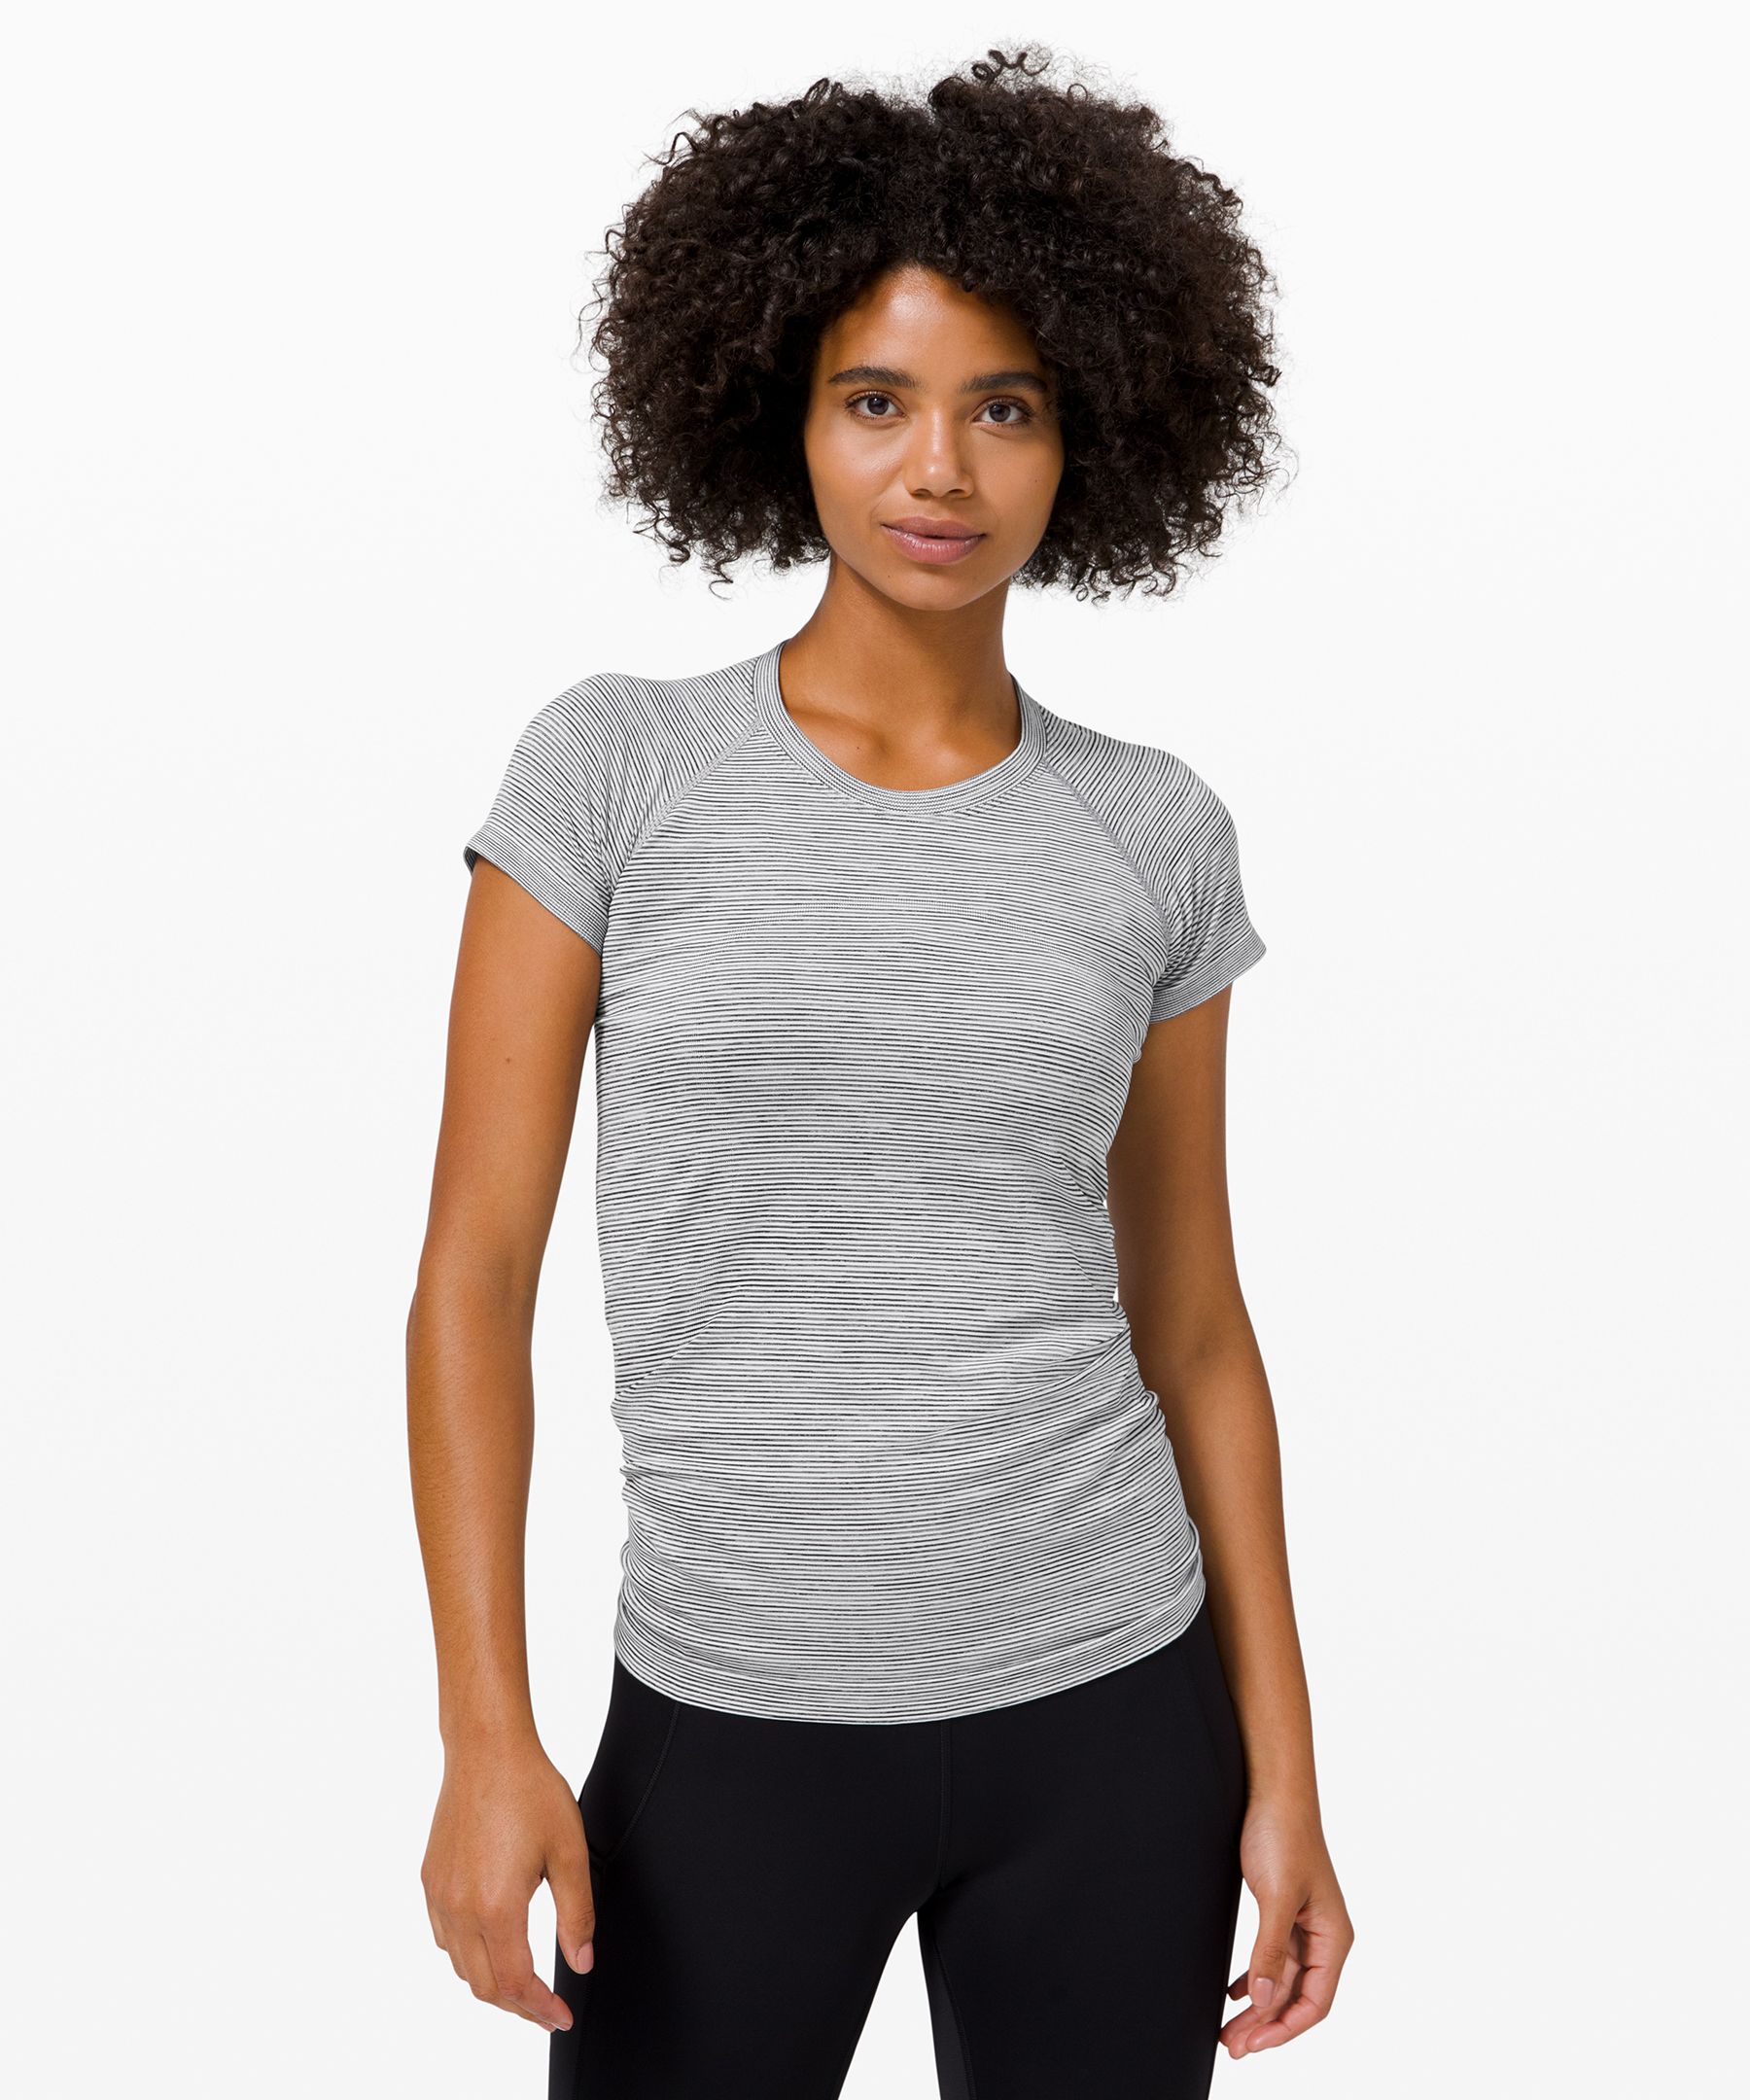 Lululemon Swiftly Tech Short Sleeve Shirt 2.0 In Wee Are From Space White